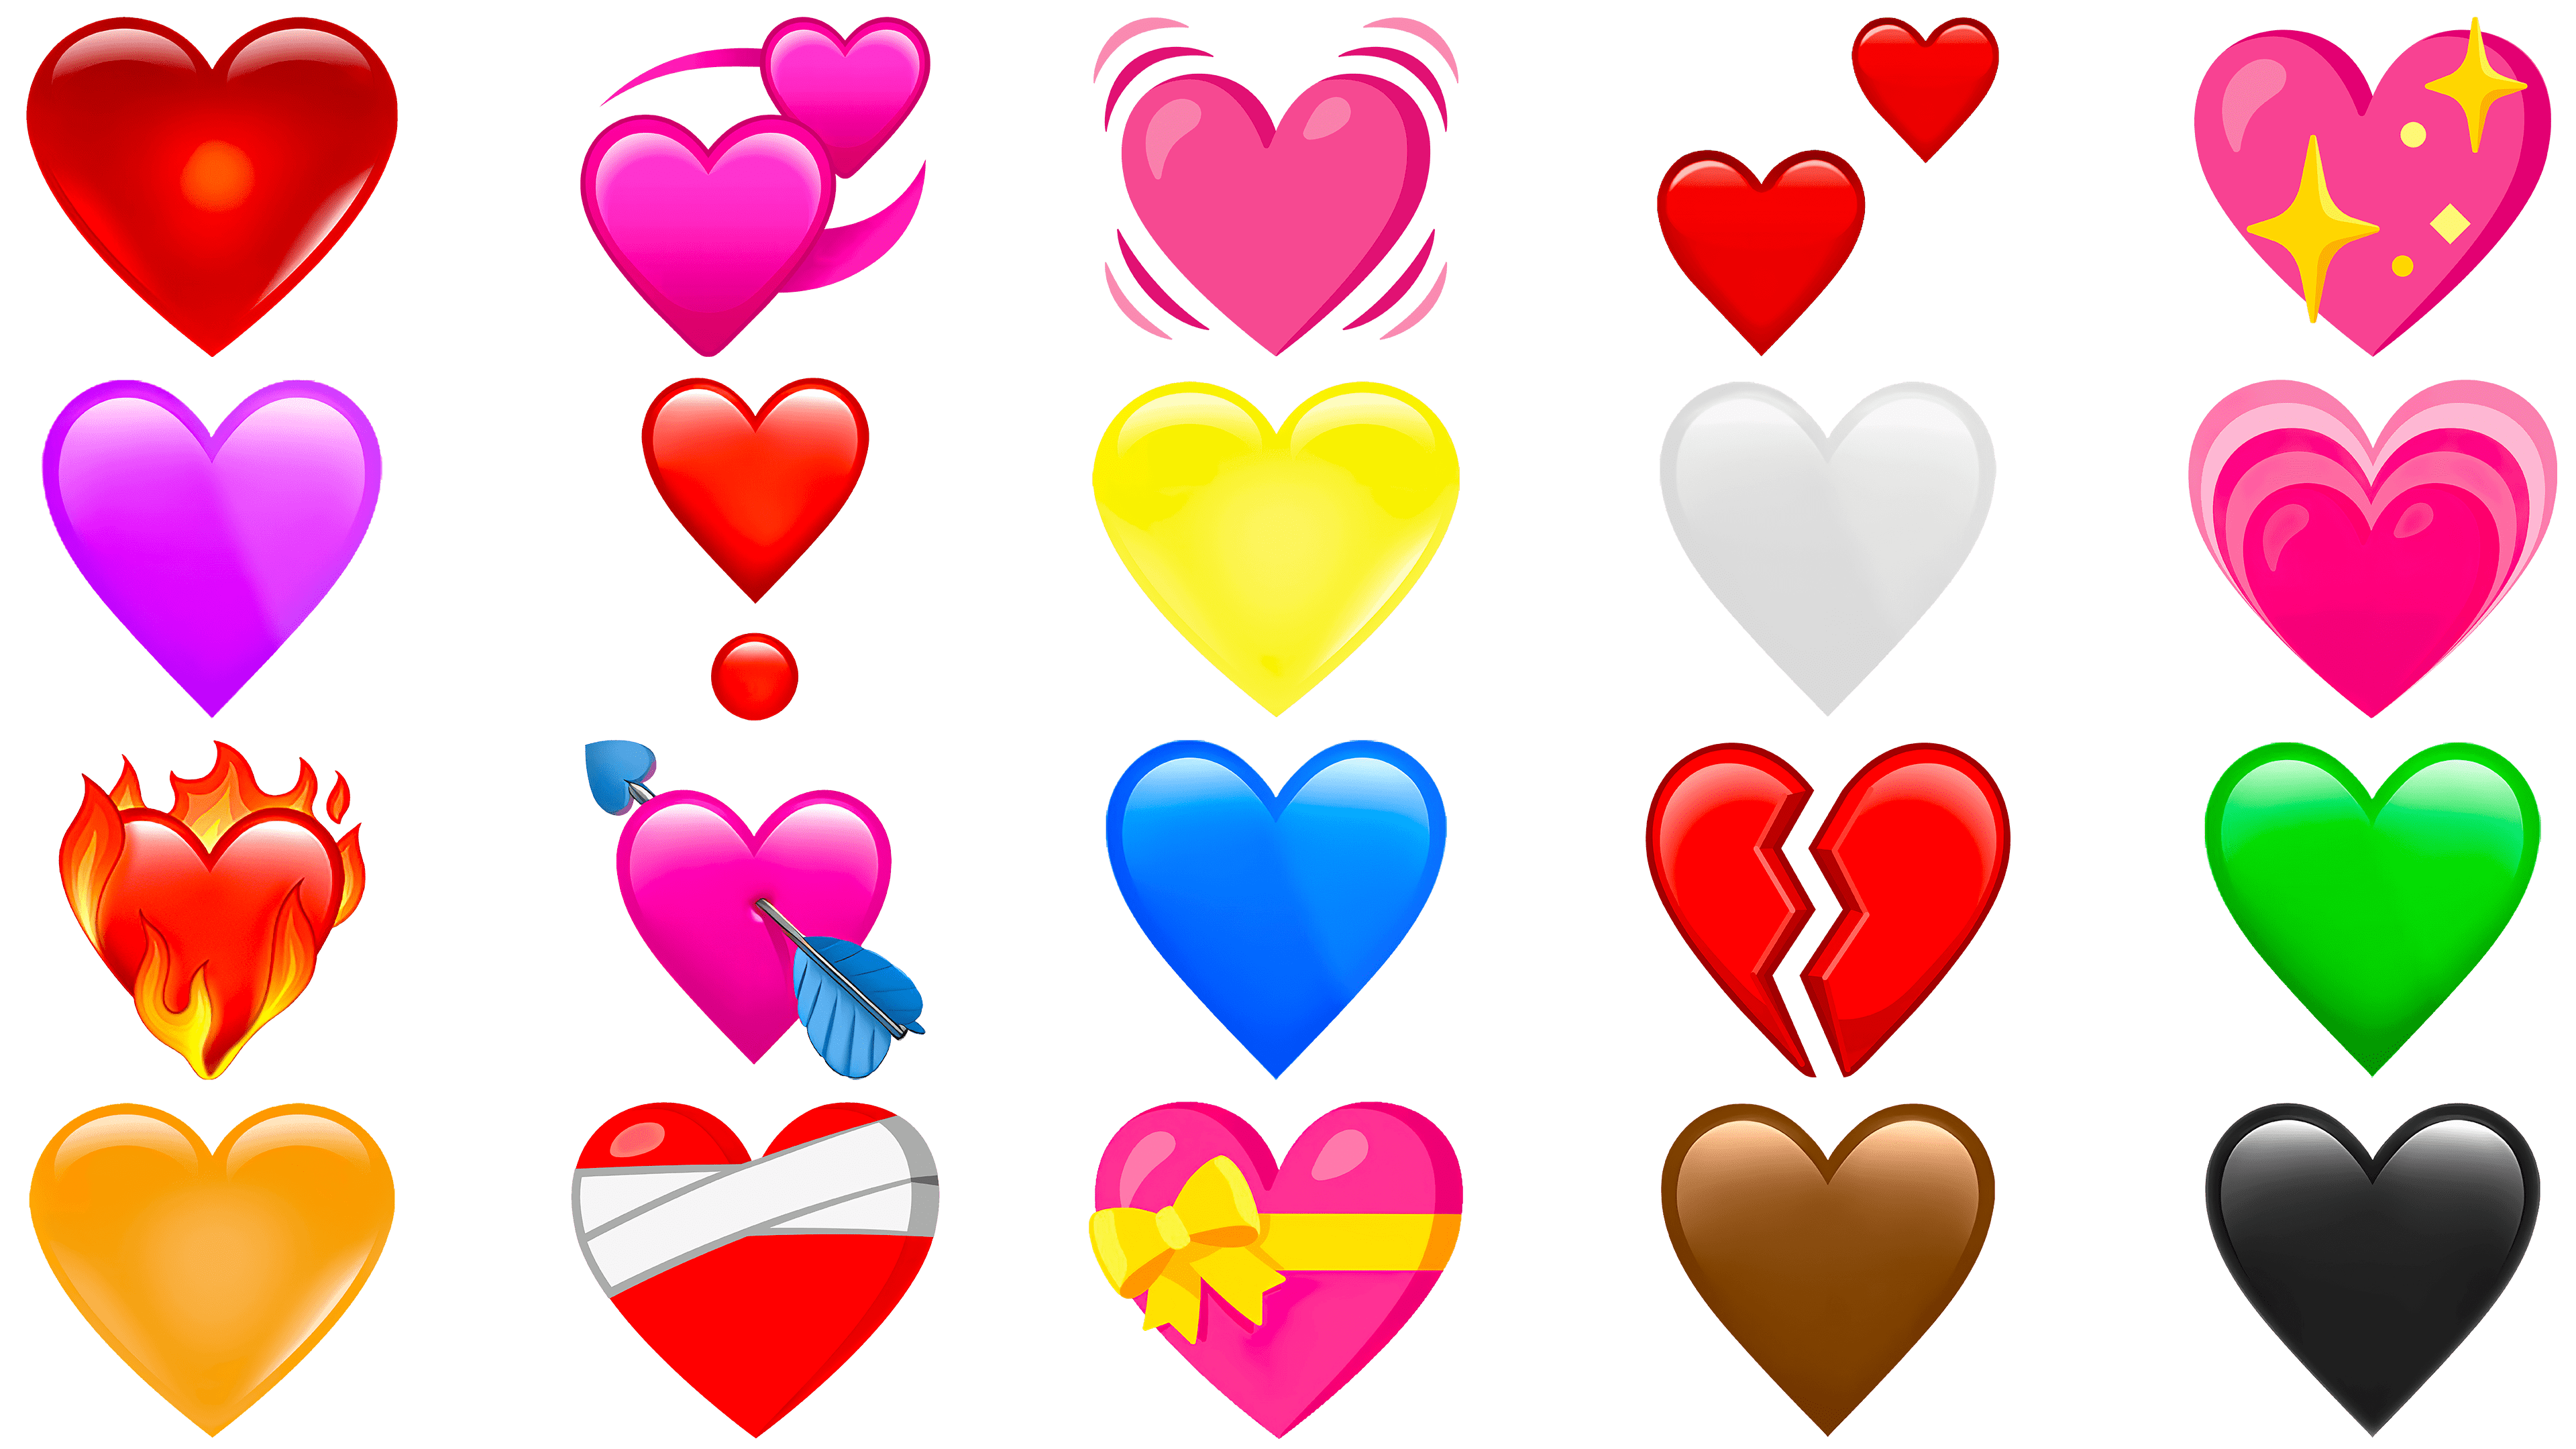 What Do the Different Heart Emojis and Colors Mean in Texting?